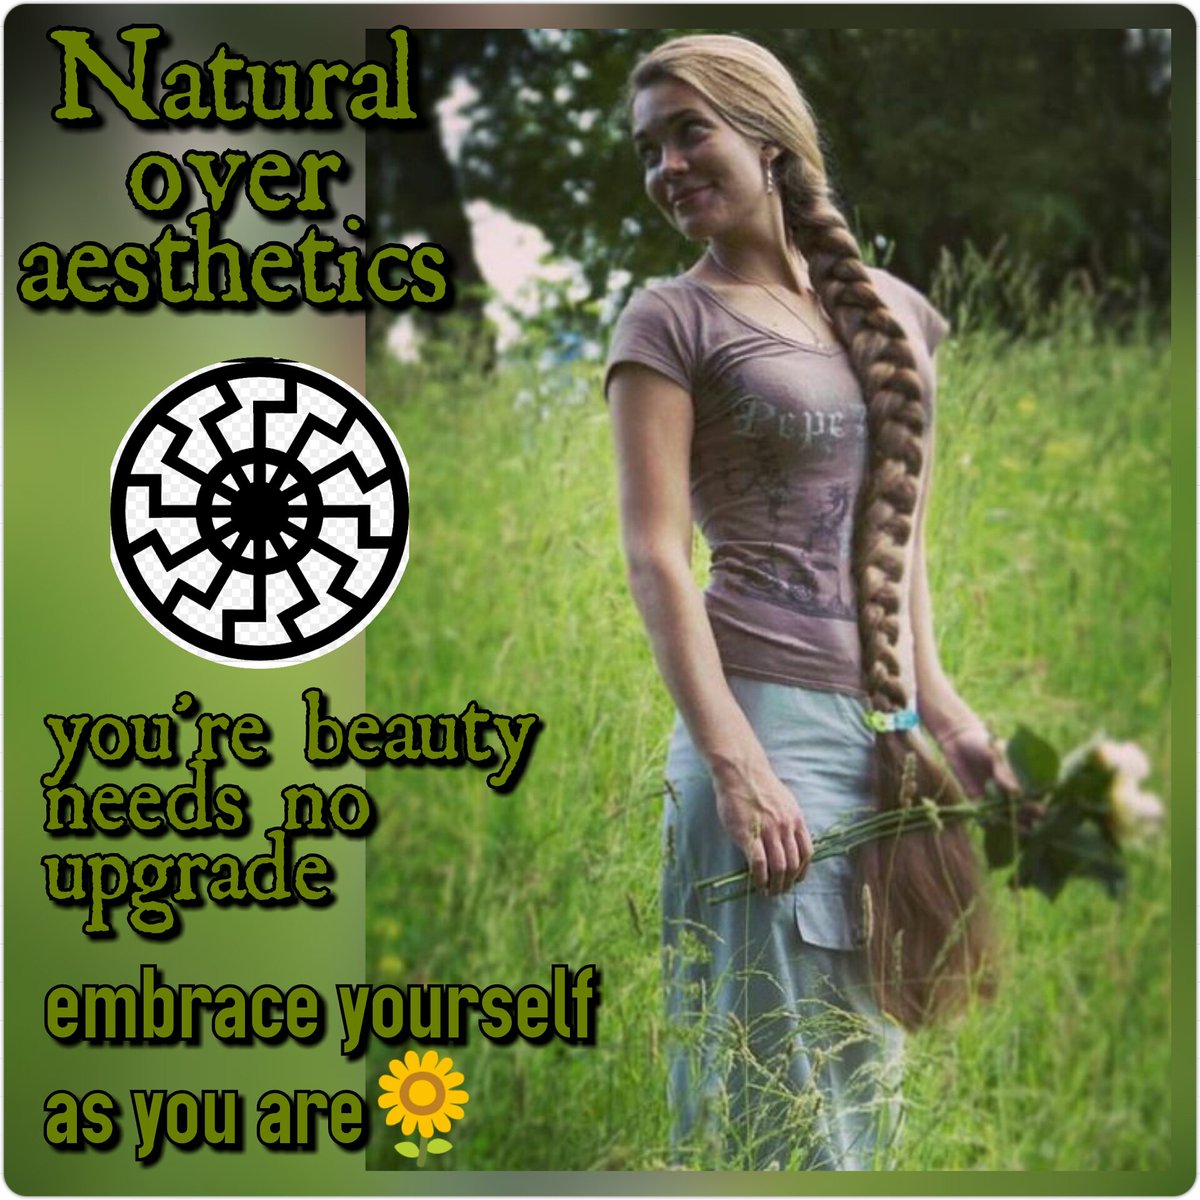 I'm a firm believer that you don't need caked on make up, fake eyelashes, and blue lips to be beautiful. You already ARE! #NATRUALBEAUTY🌻